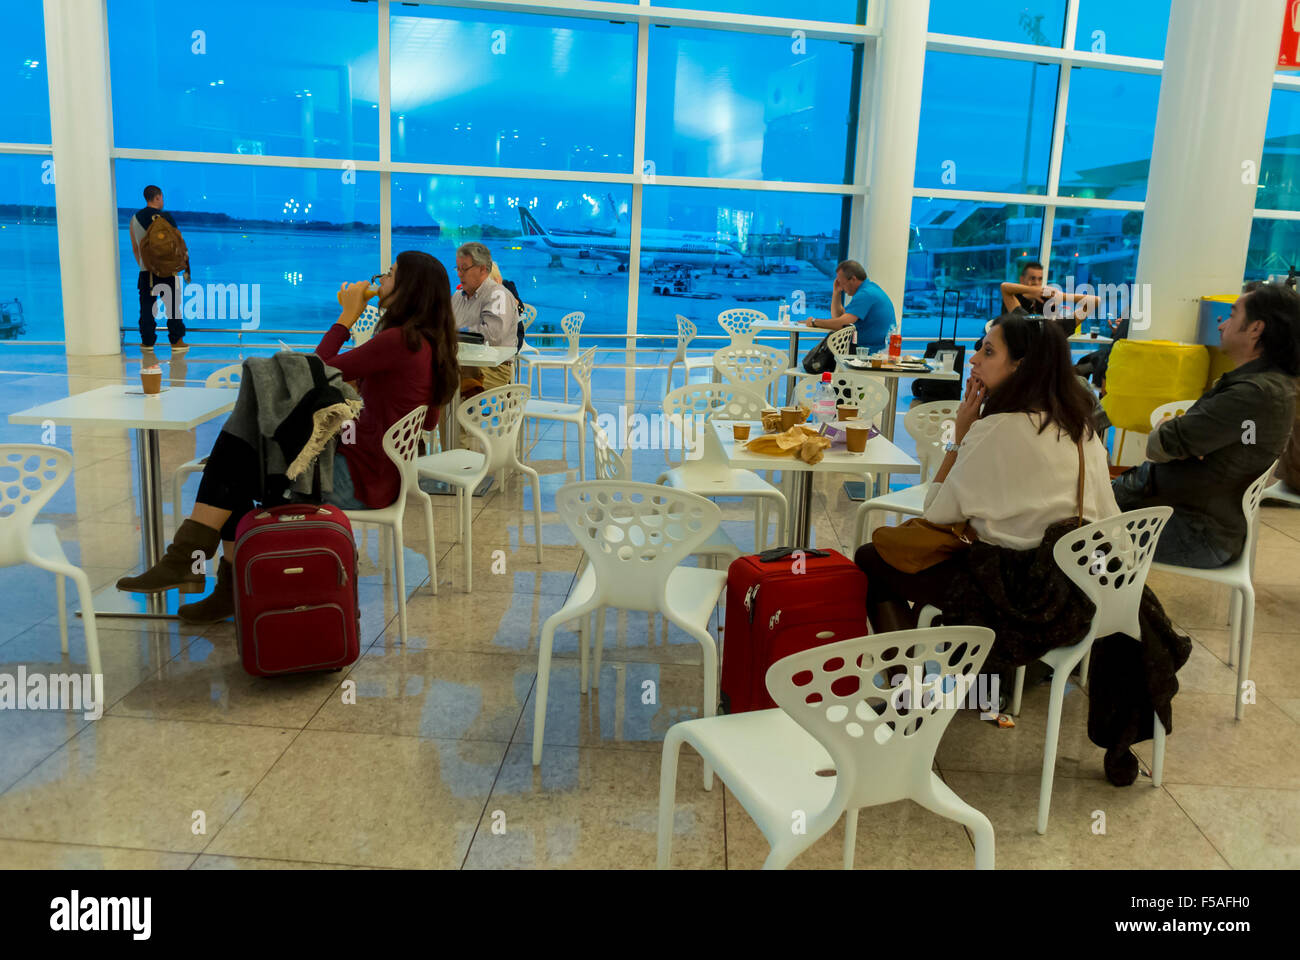 Barcelona, Spain, People Traveling in Airport El Prat, Terminal 1, Scenes, Sitting in Local Cafe, airport coffee shop Stock Photo